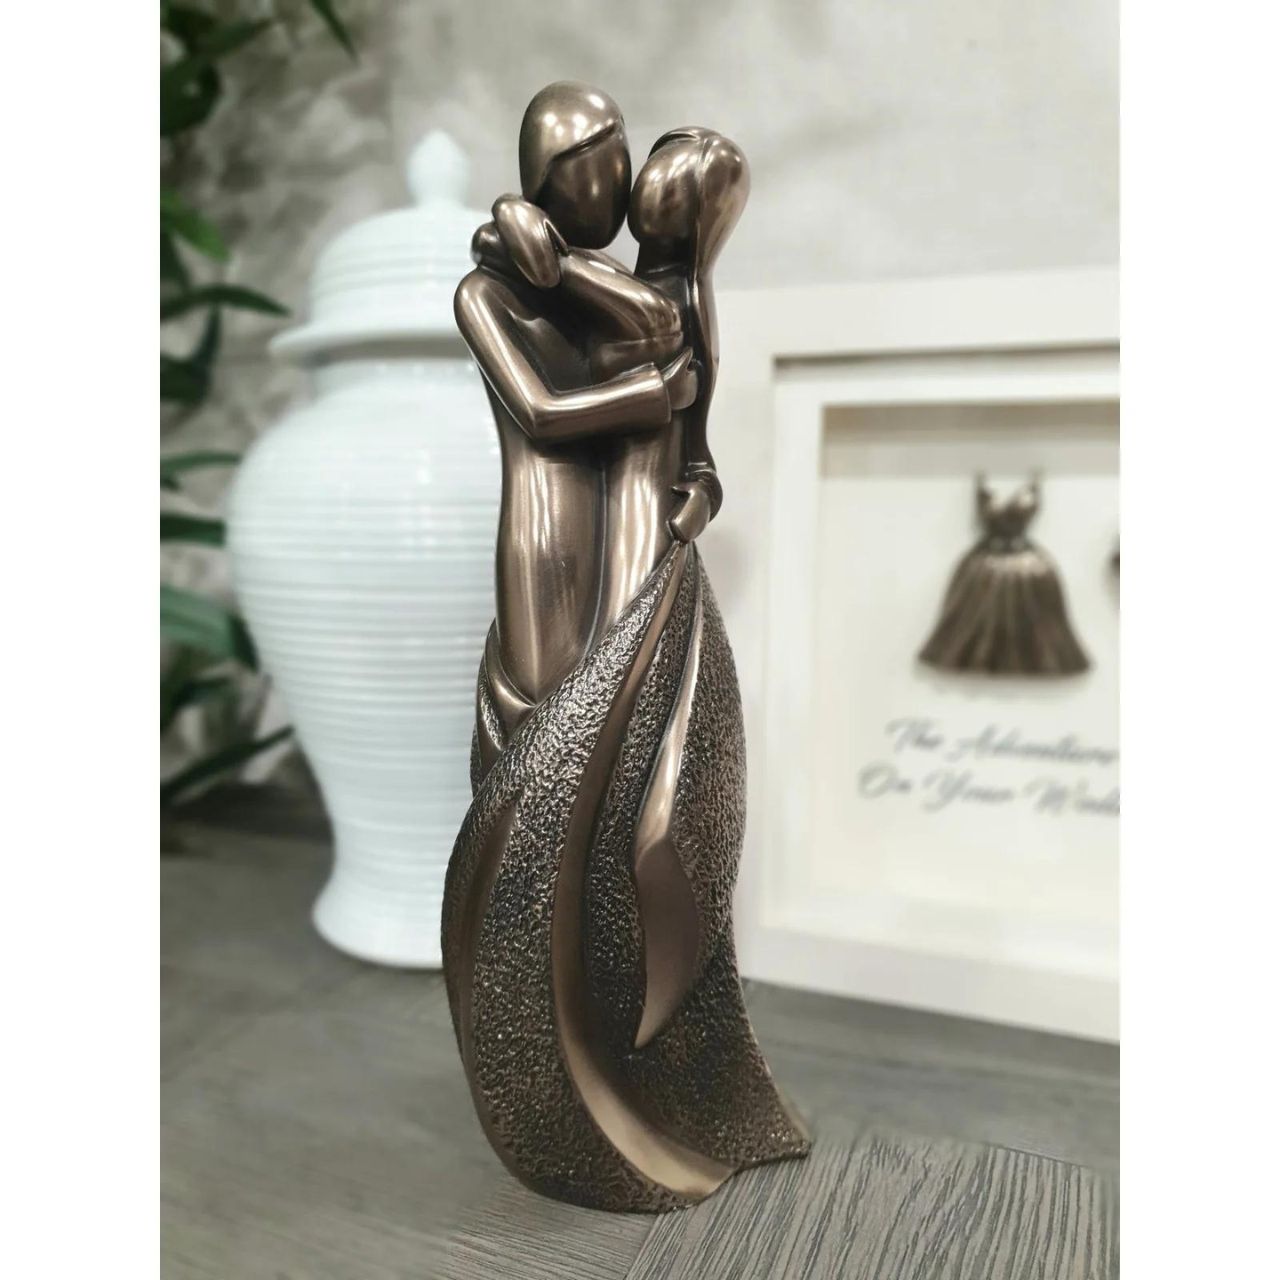 The Lovers by Genesis  This beautiful piece, The Lovers is a perfect gift for any occasion as it depicts the unity and magic of love in a perfect partnership.